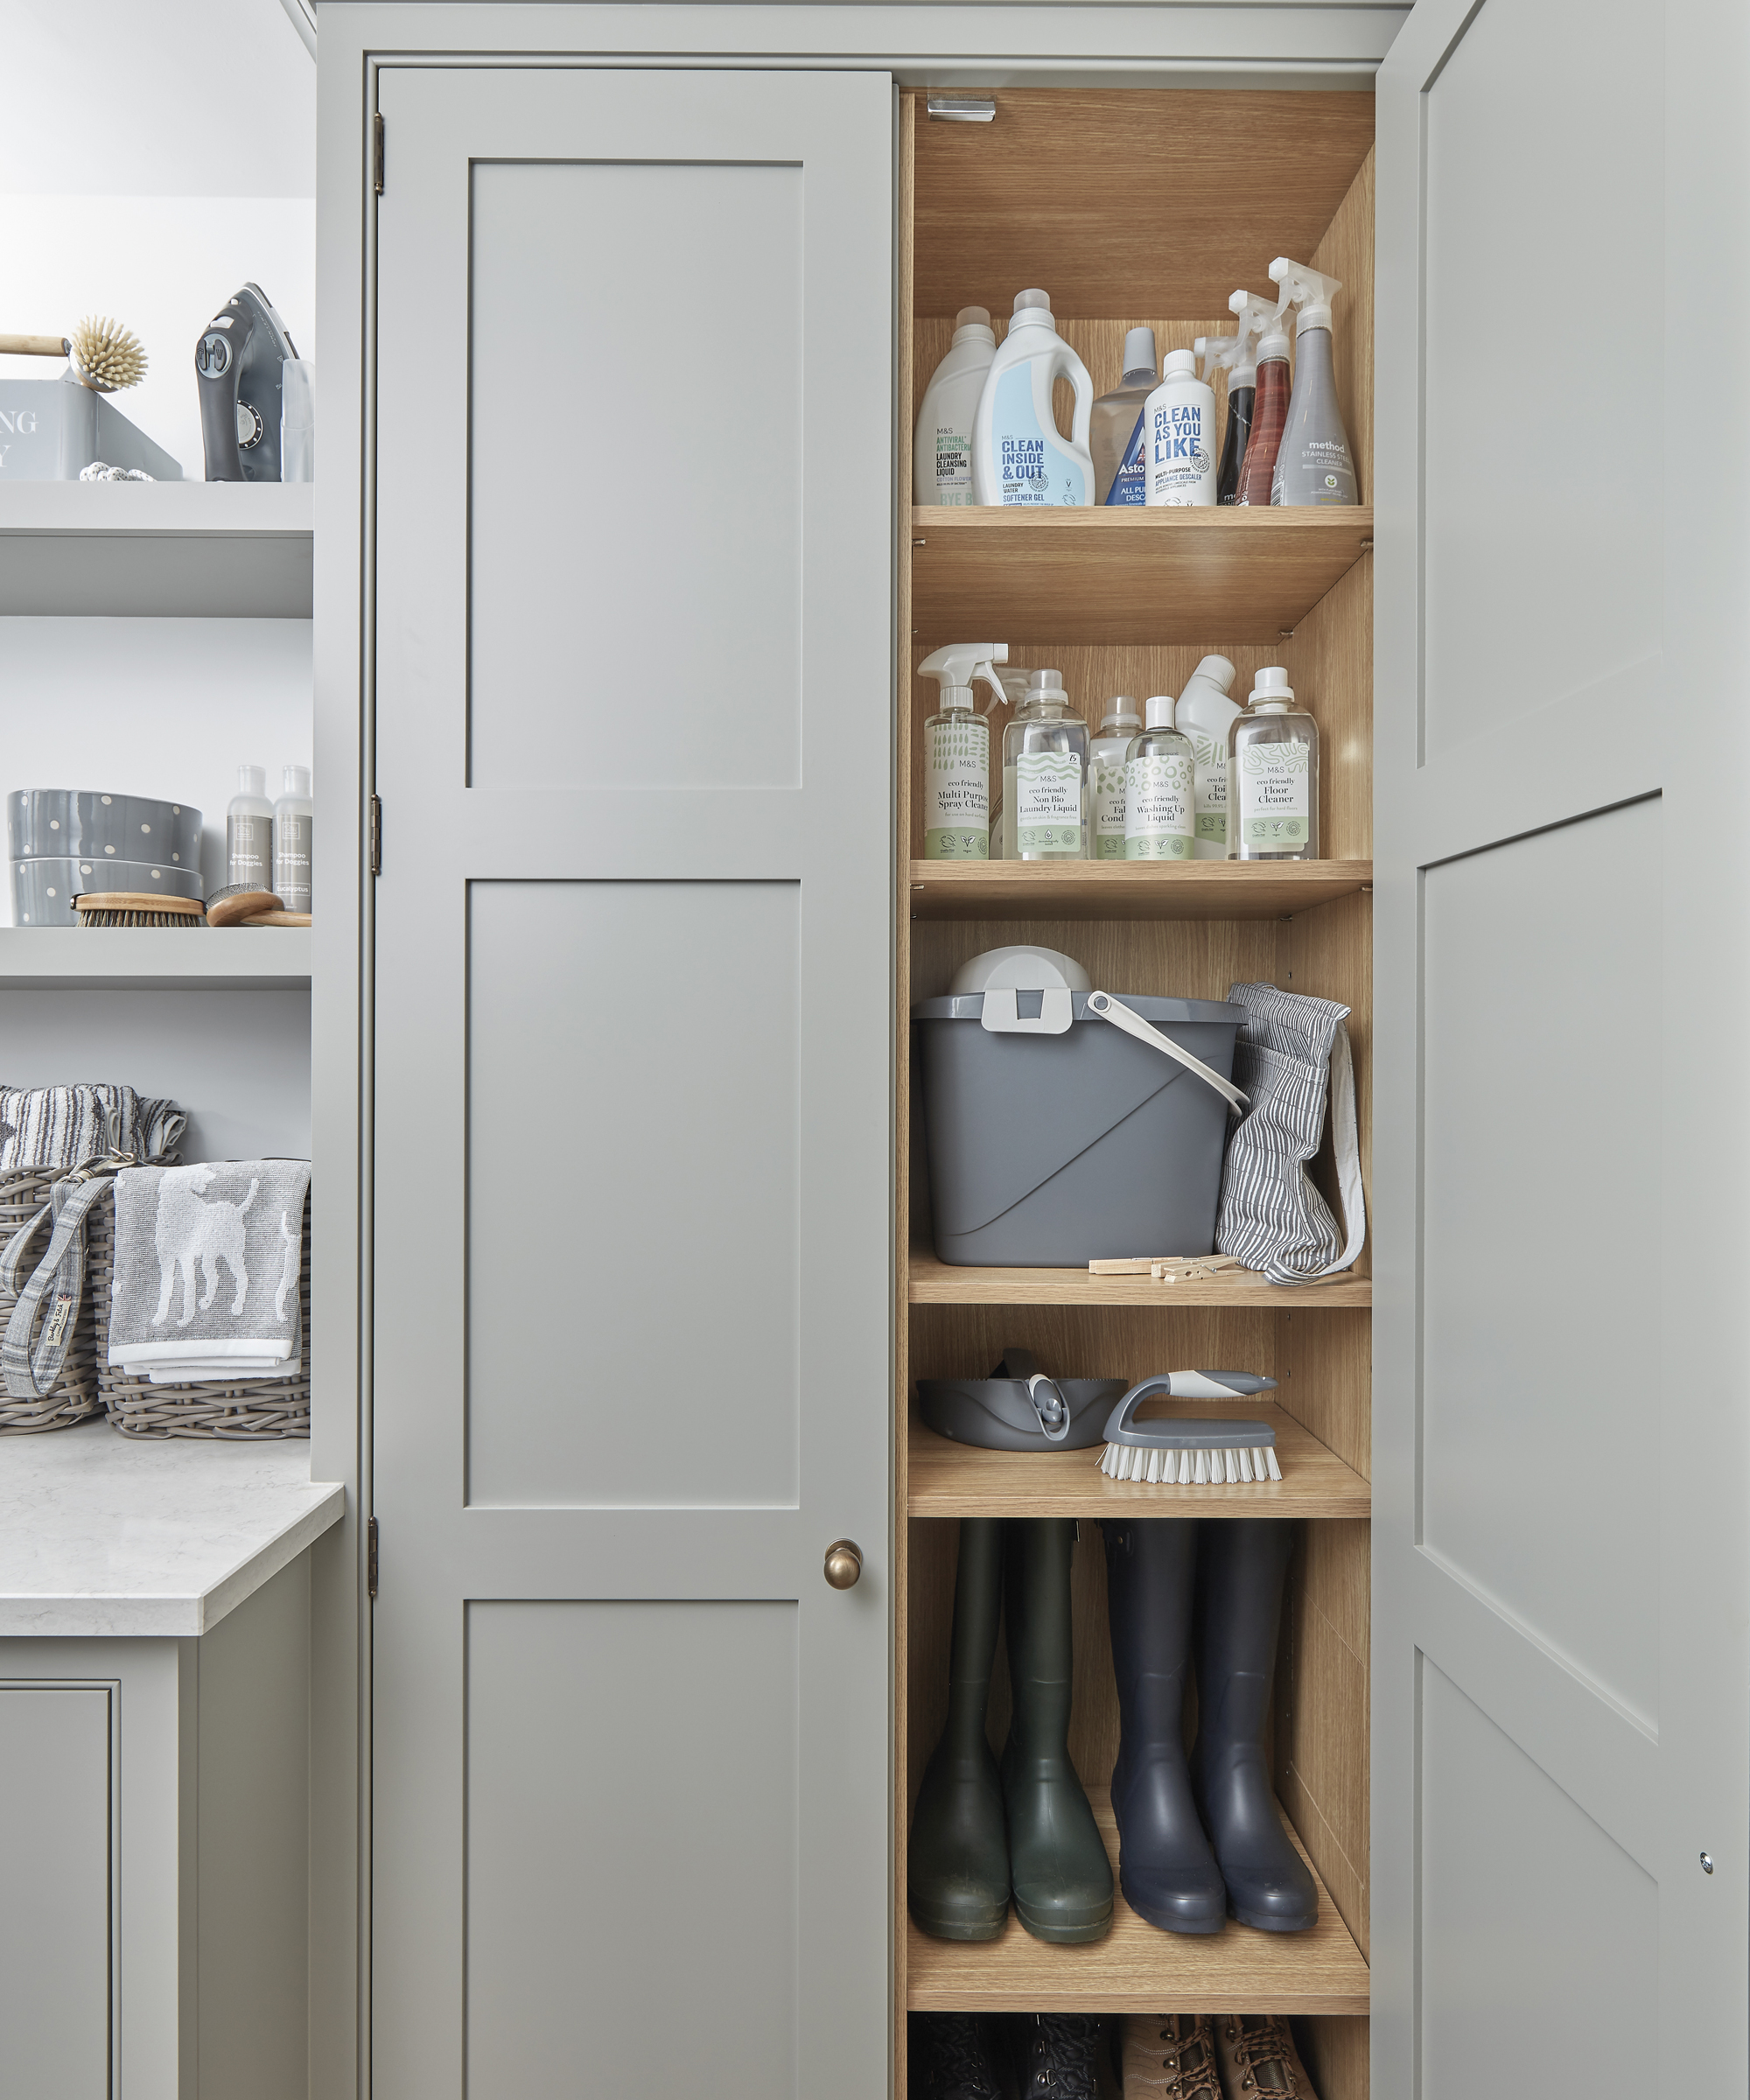 A small utility room idea with tall cabinet opened to show organised shelves